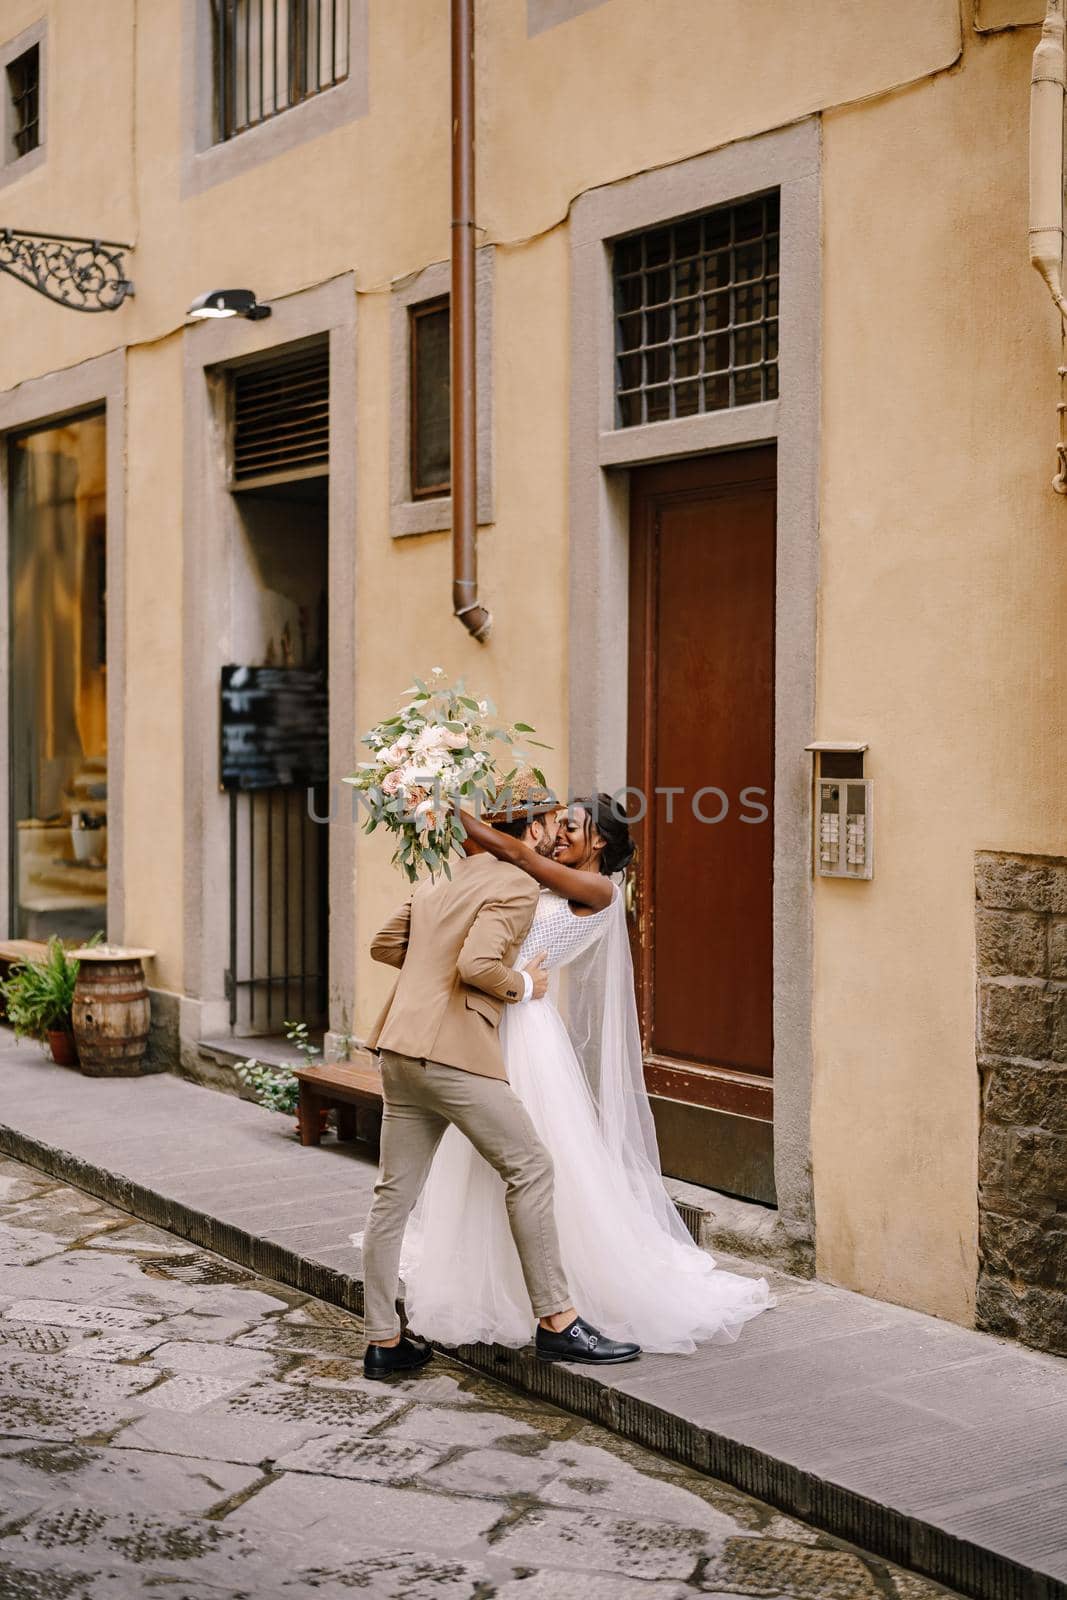 Interracial wedding couple. Wedding in Florence, Italy. African-American bride and Caucasian groom kiss on the street. by Nadtochiy